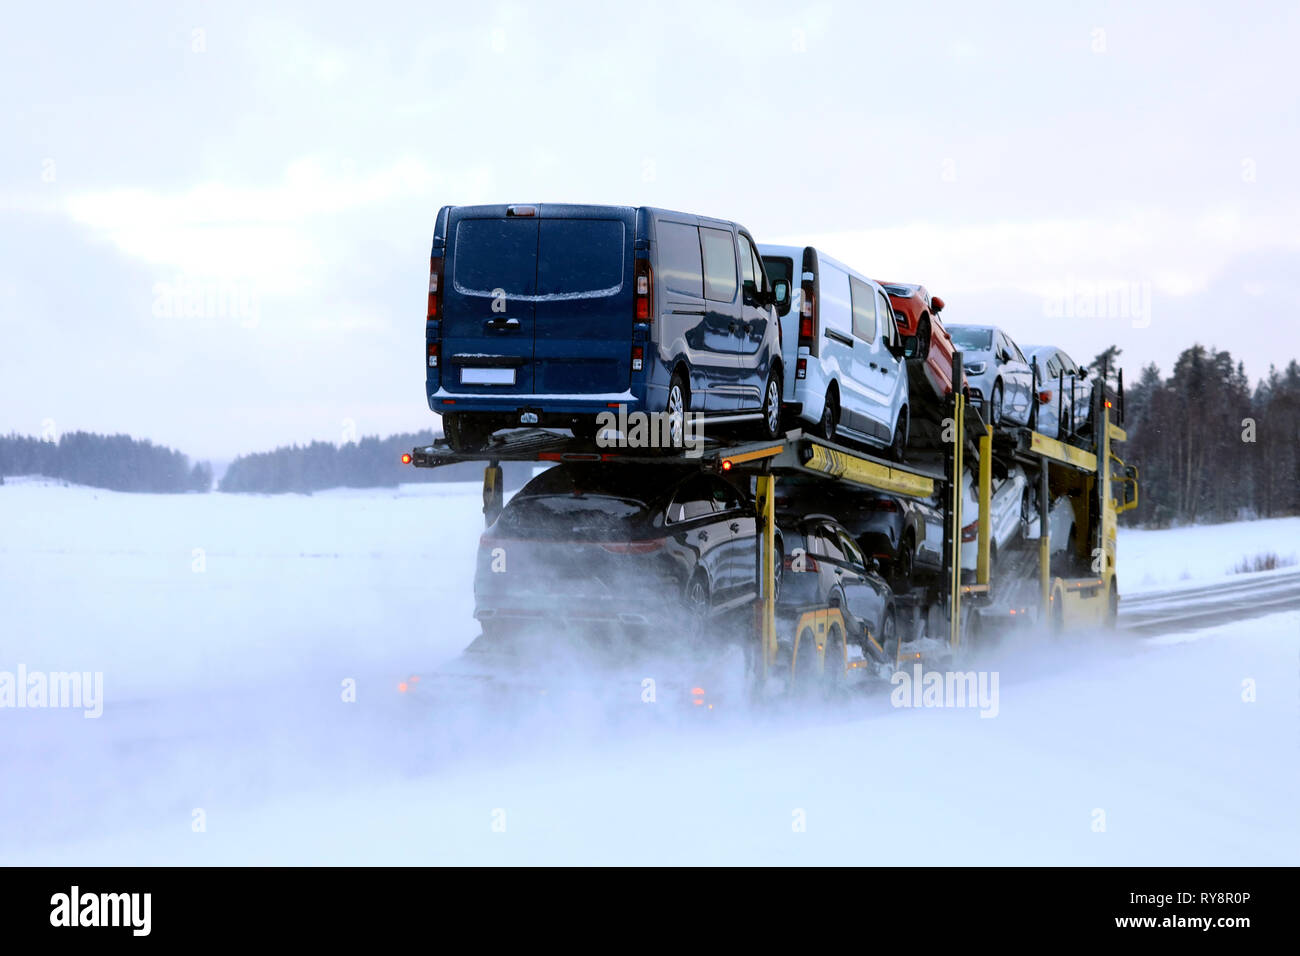 Car carrier truck transports a load of vehicles on a day of winter snowfall, rear view. Salo, Finland. January 18, 2019. Stock Photo